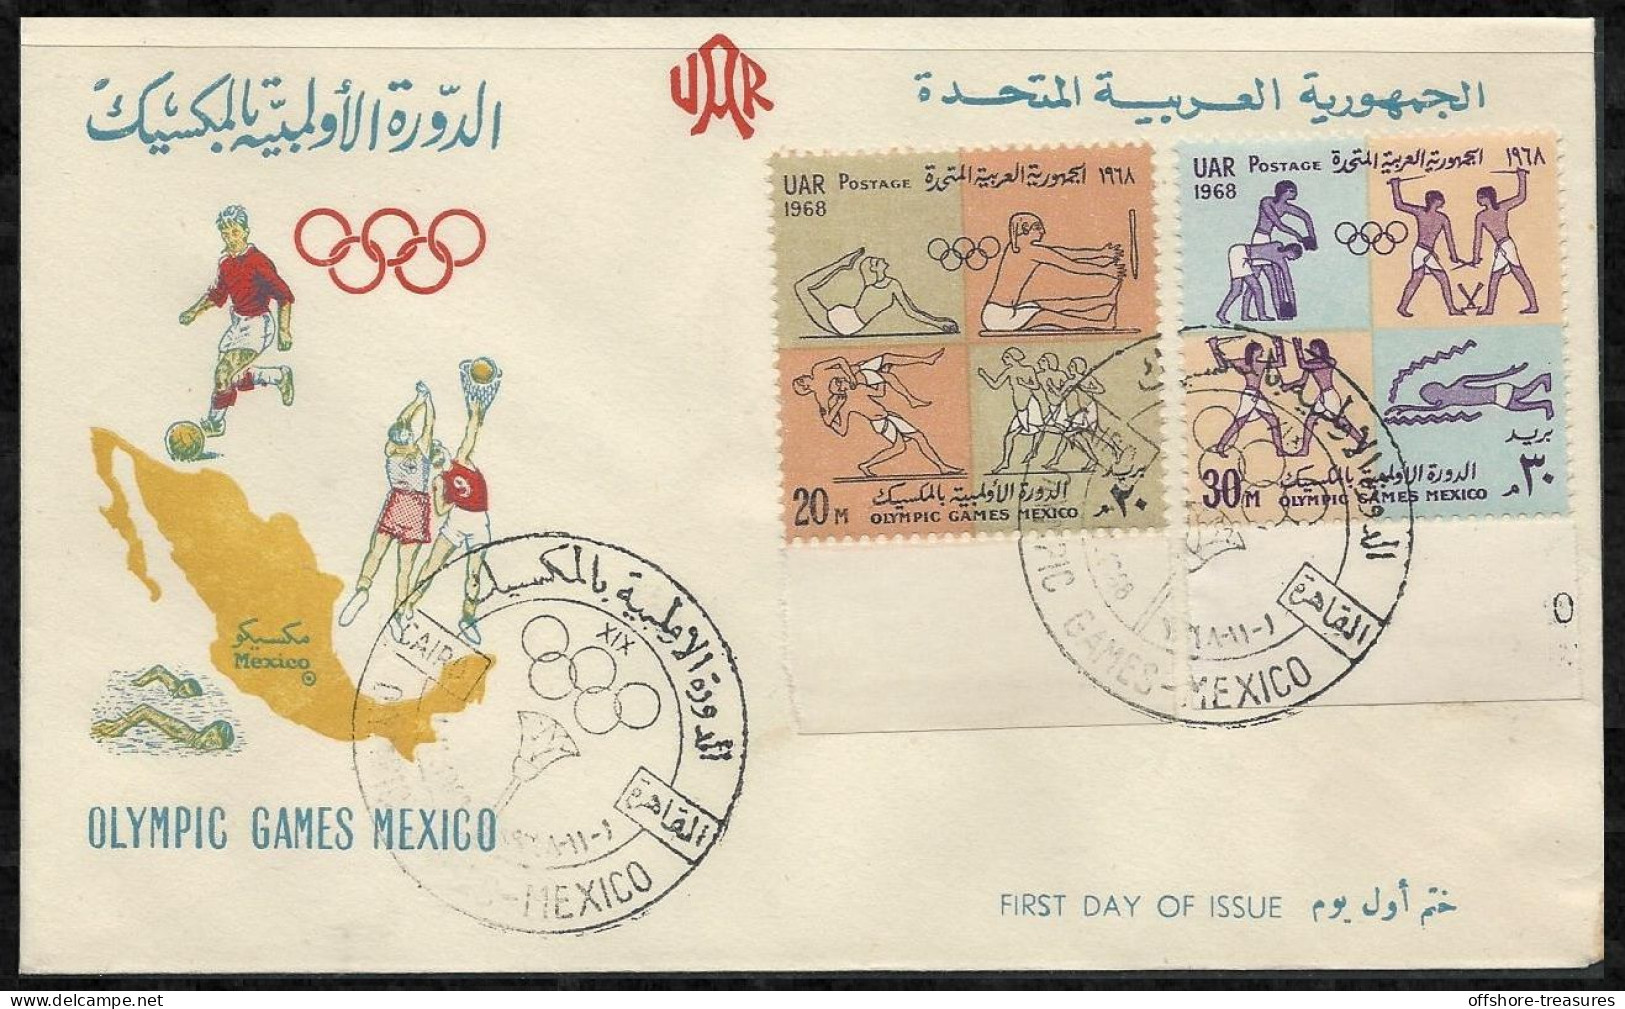 Egypt UAR POSTAGE 1968 Olympic Games Mexico FDC / First Day Cover - Unused Stamps